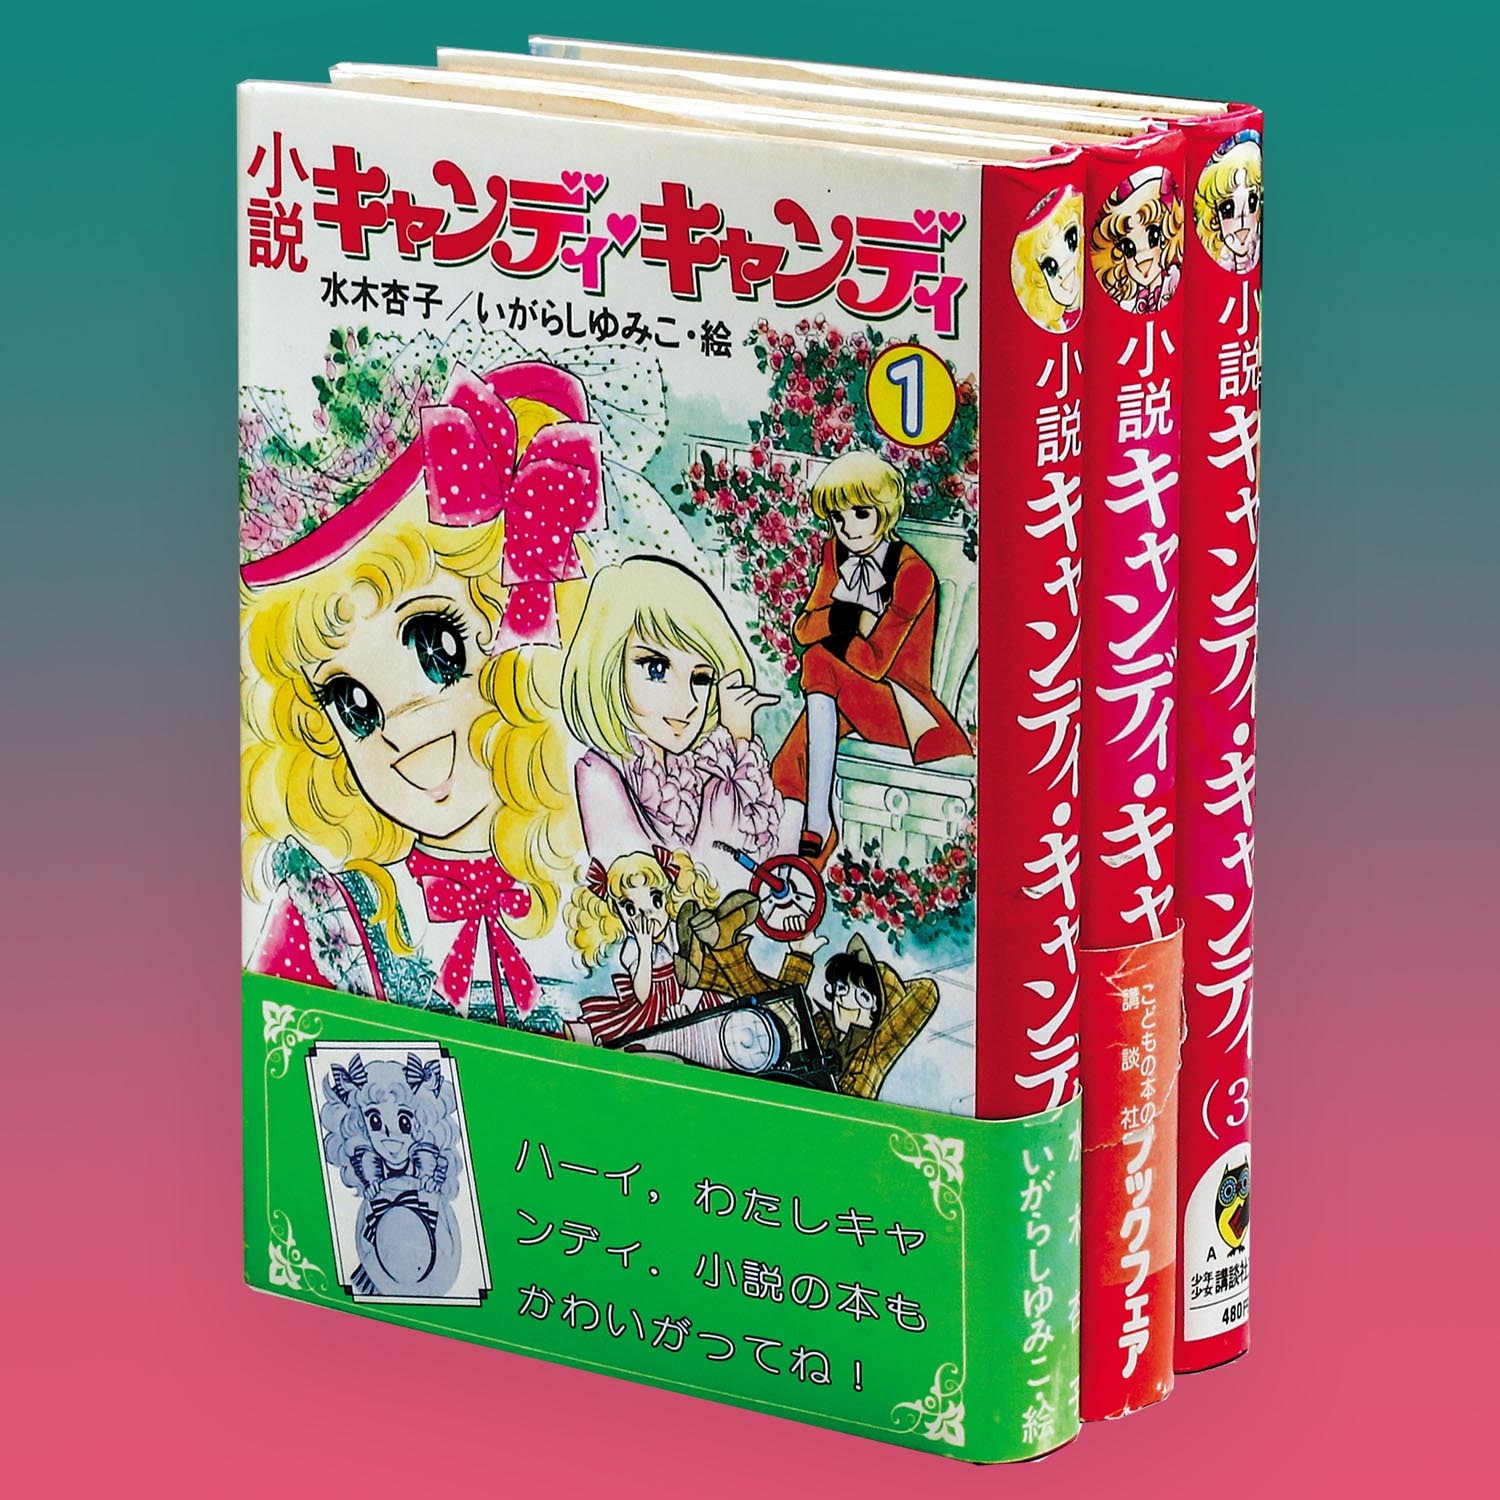 Novel Candy Candy Complete 3 Volume Set First Edition